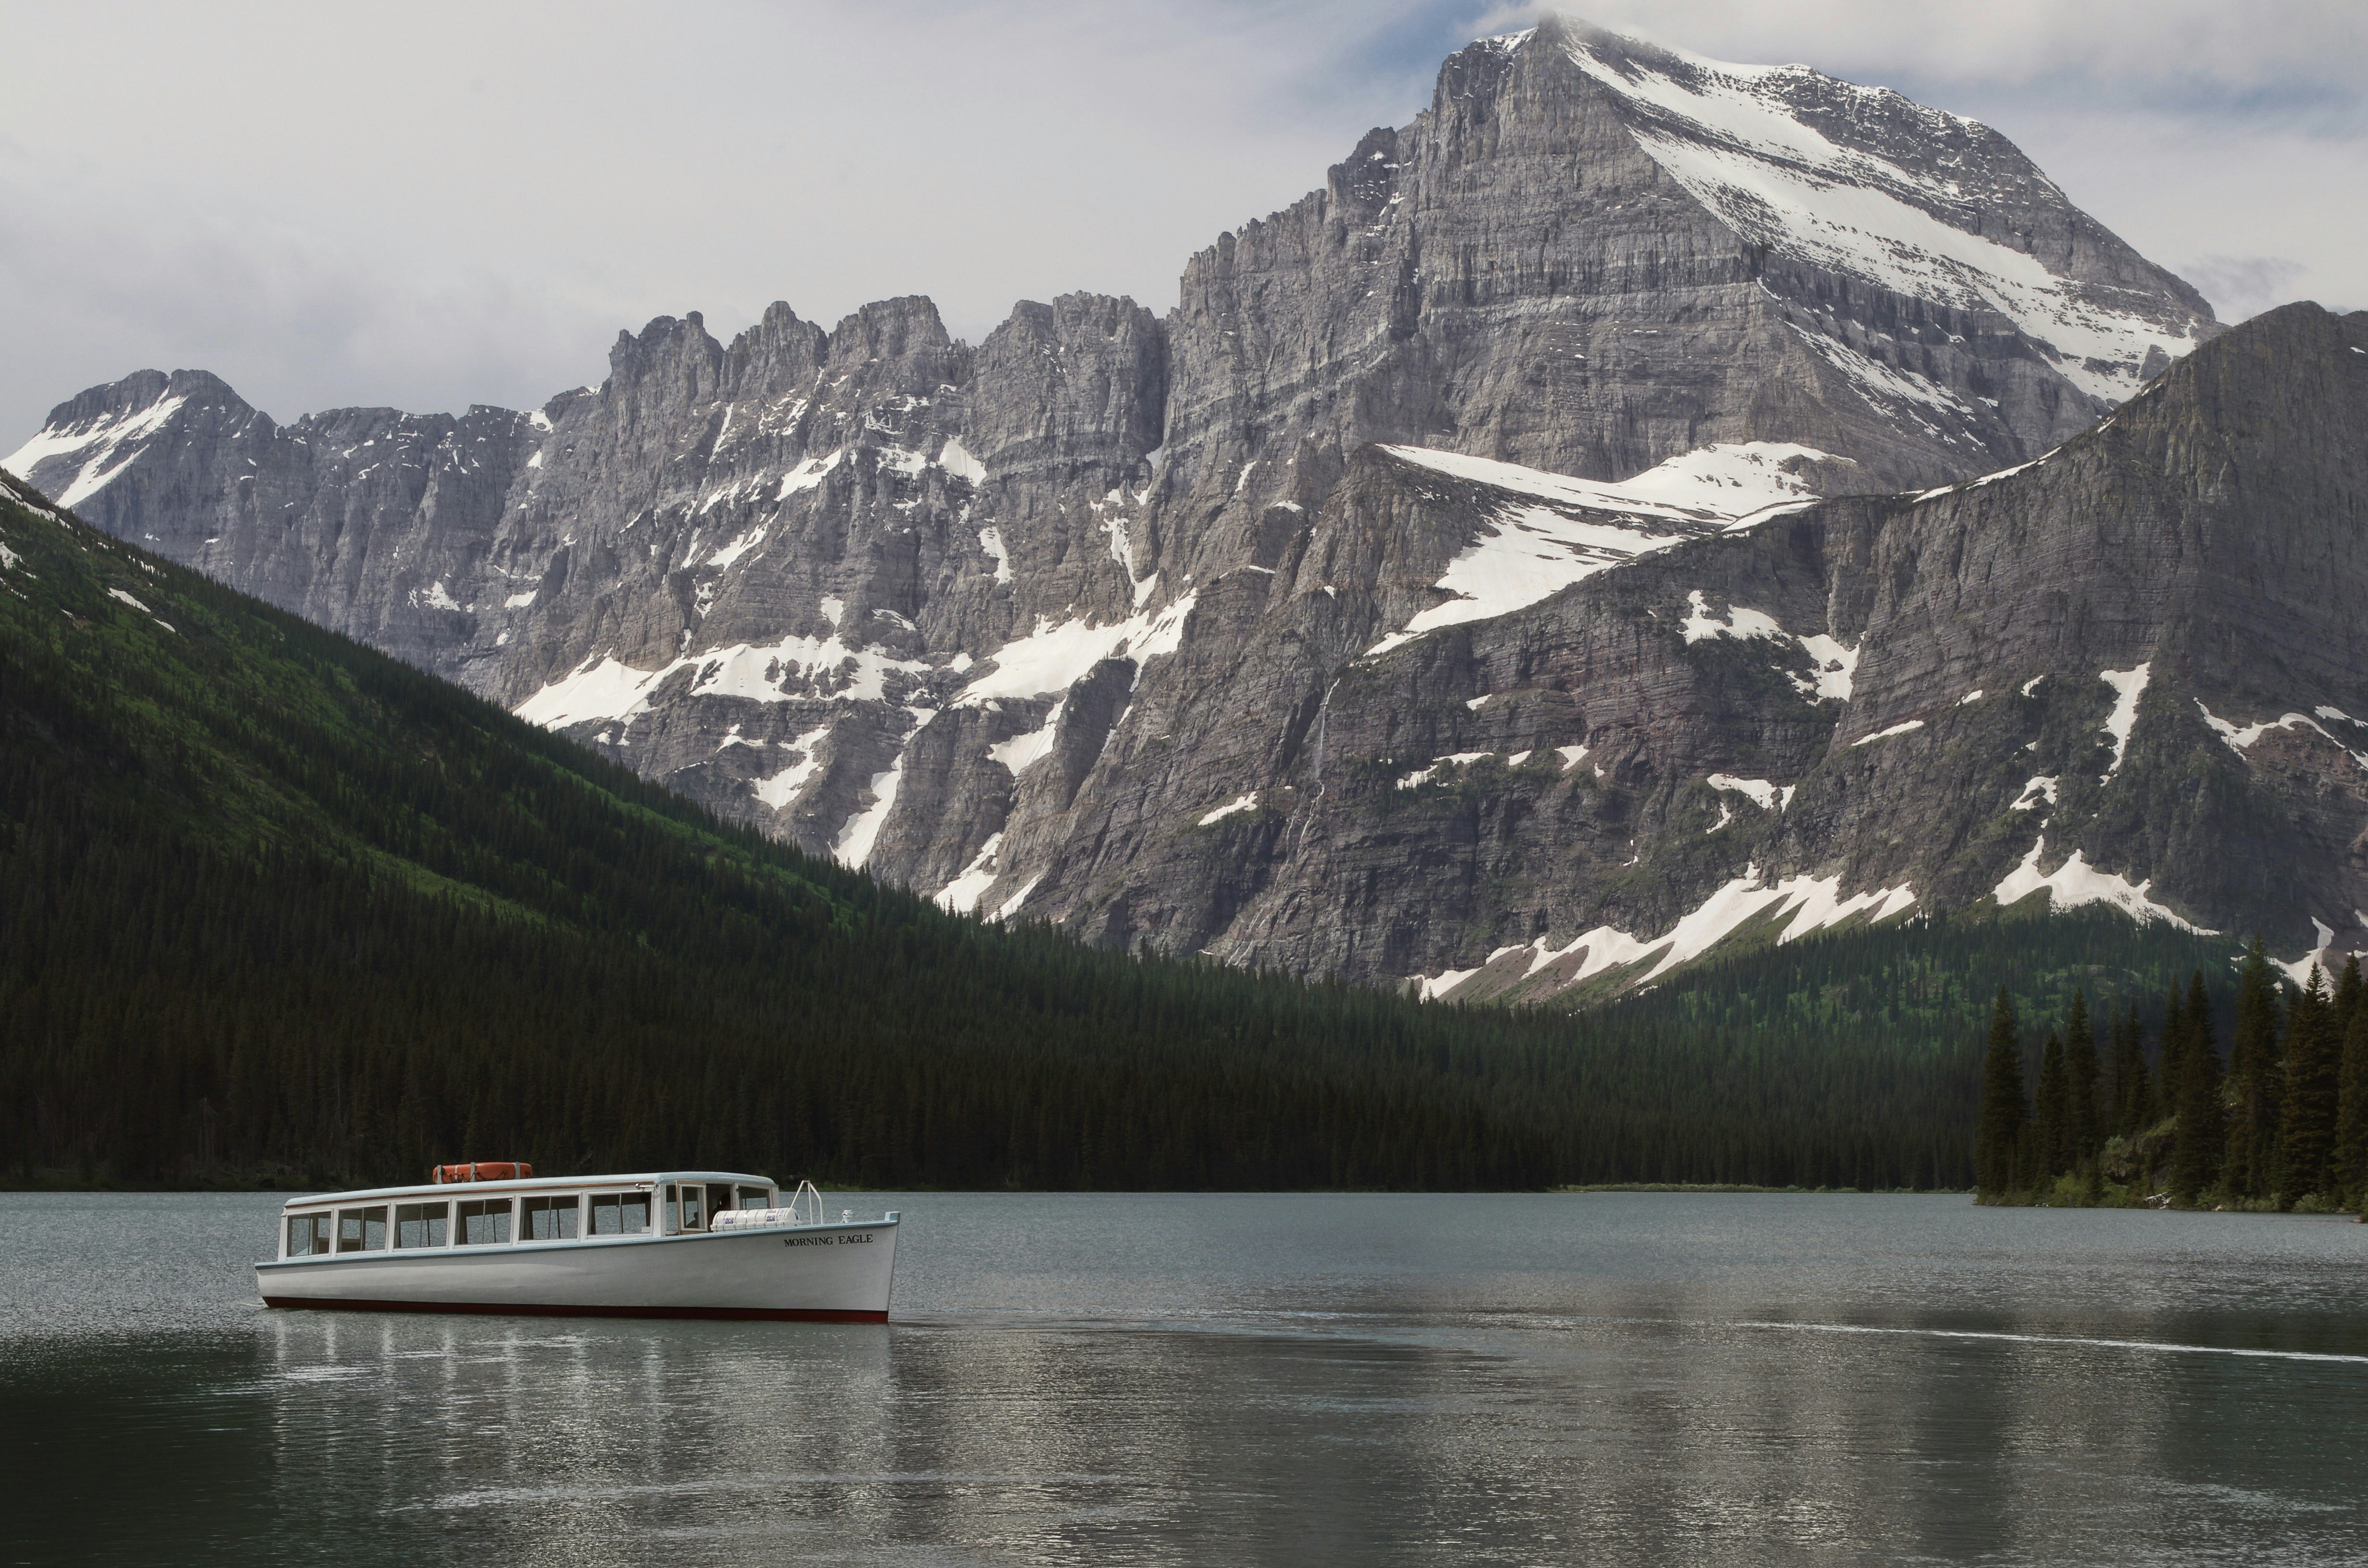 Great start to a morning hike out in glacier national park. The hike up to Grinnell glacier started with a fantastic view of the continental divid and one of the iconic GNP boat co boats, Morning Eagle.